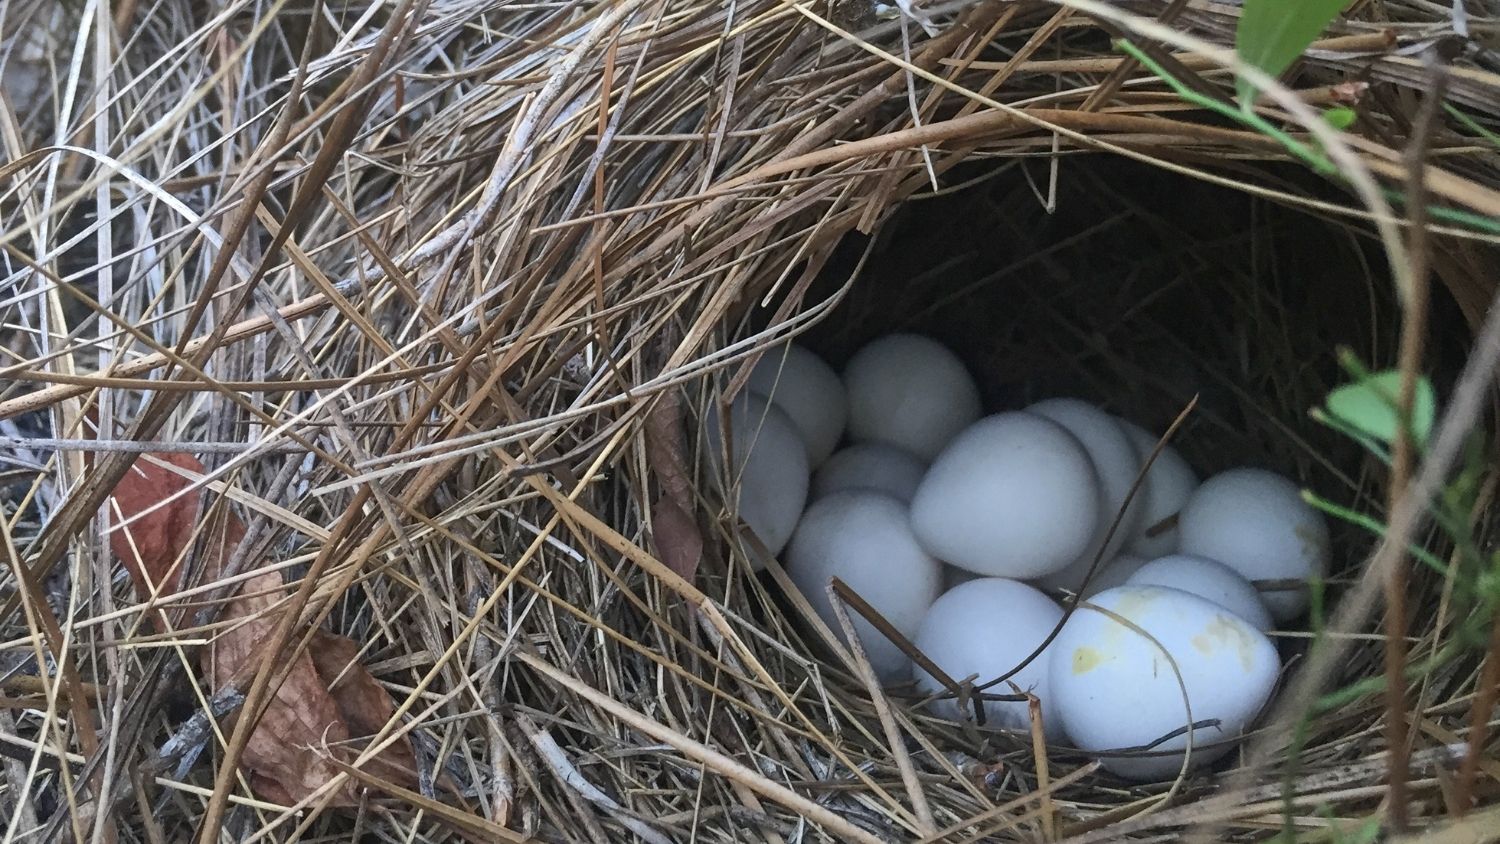 Northern bobwhite nest, hidden in groundcover and filled with many white eggs